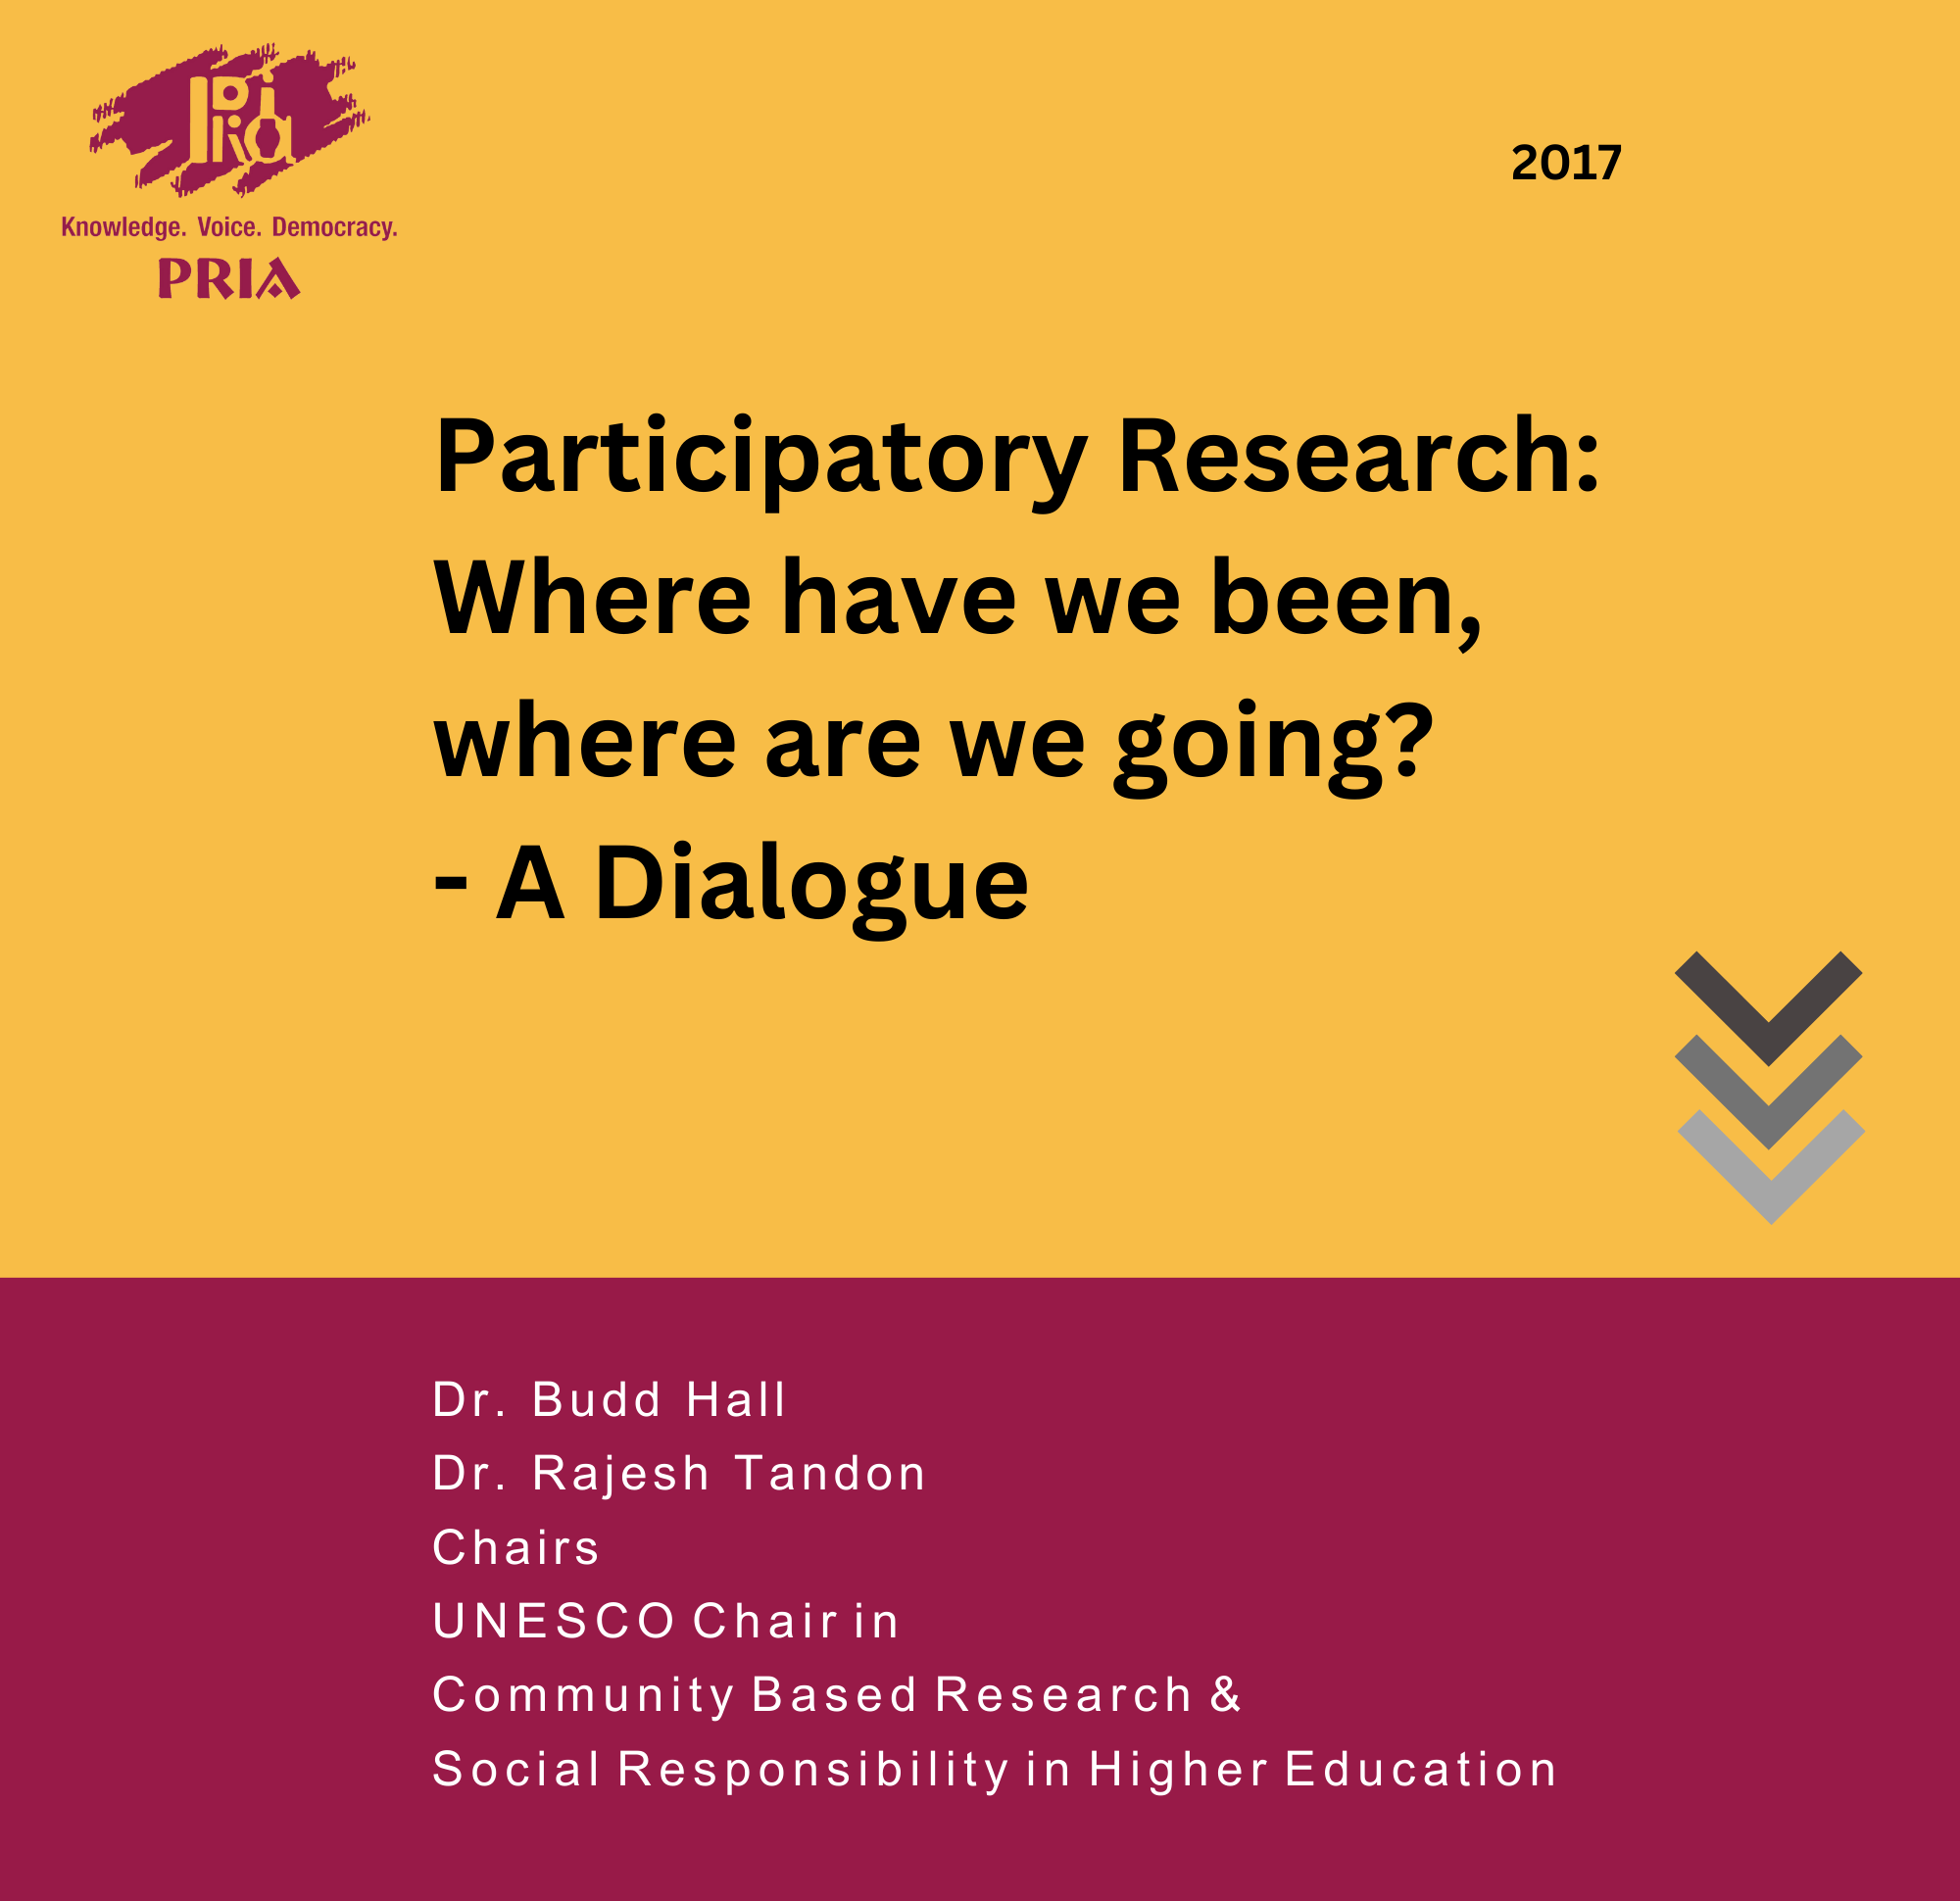 Participatory Research: Where have we been, where are we going? - A Dialogue